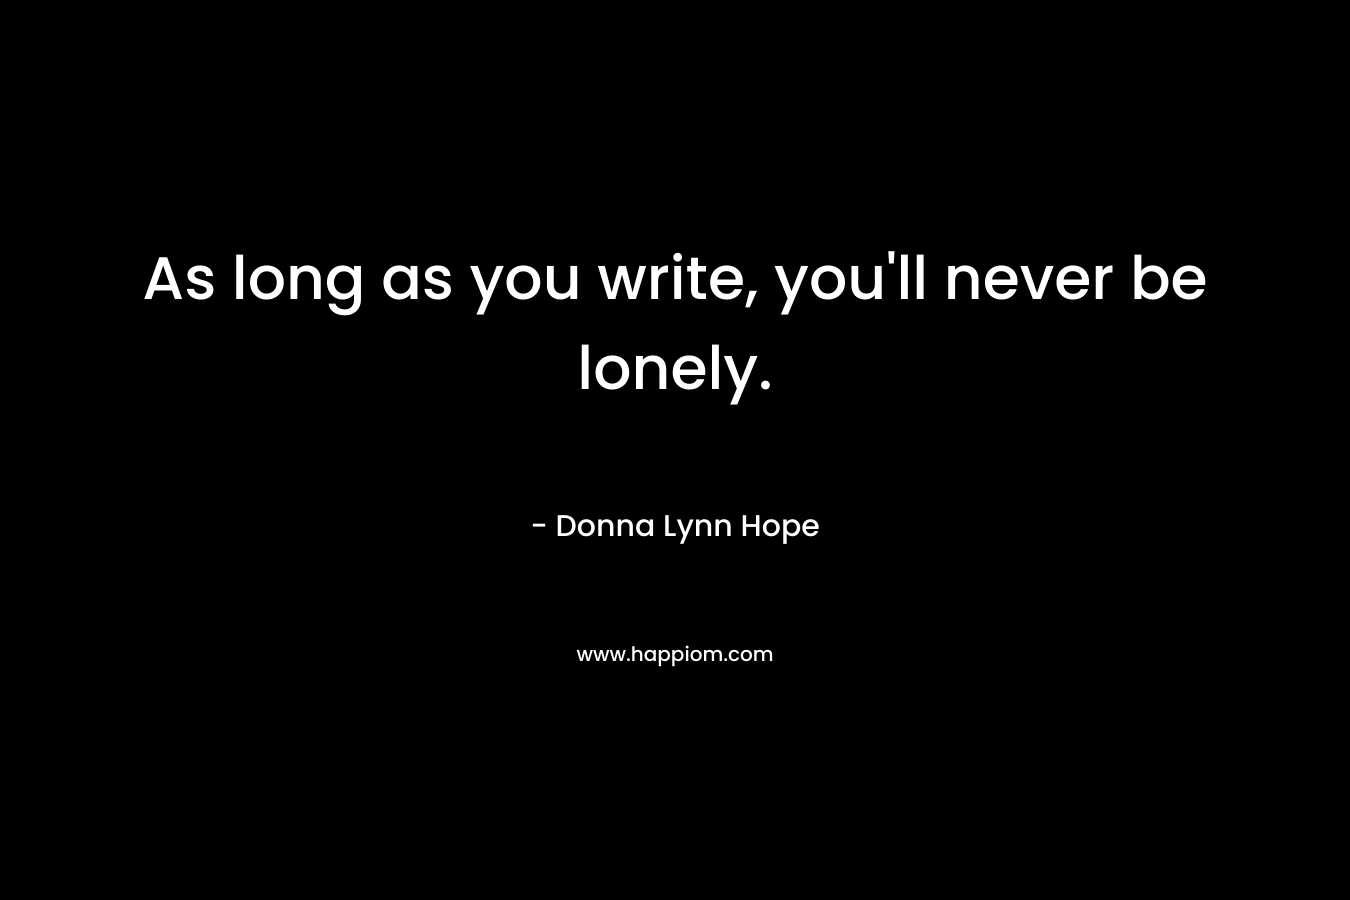 As long as you write, you'll never be lonely.